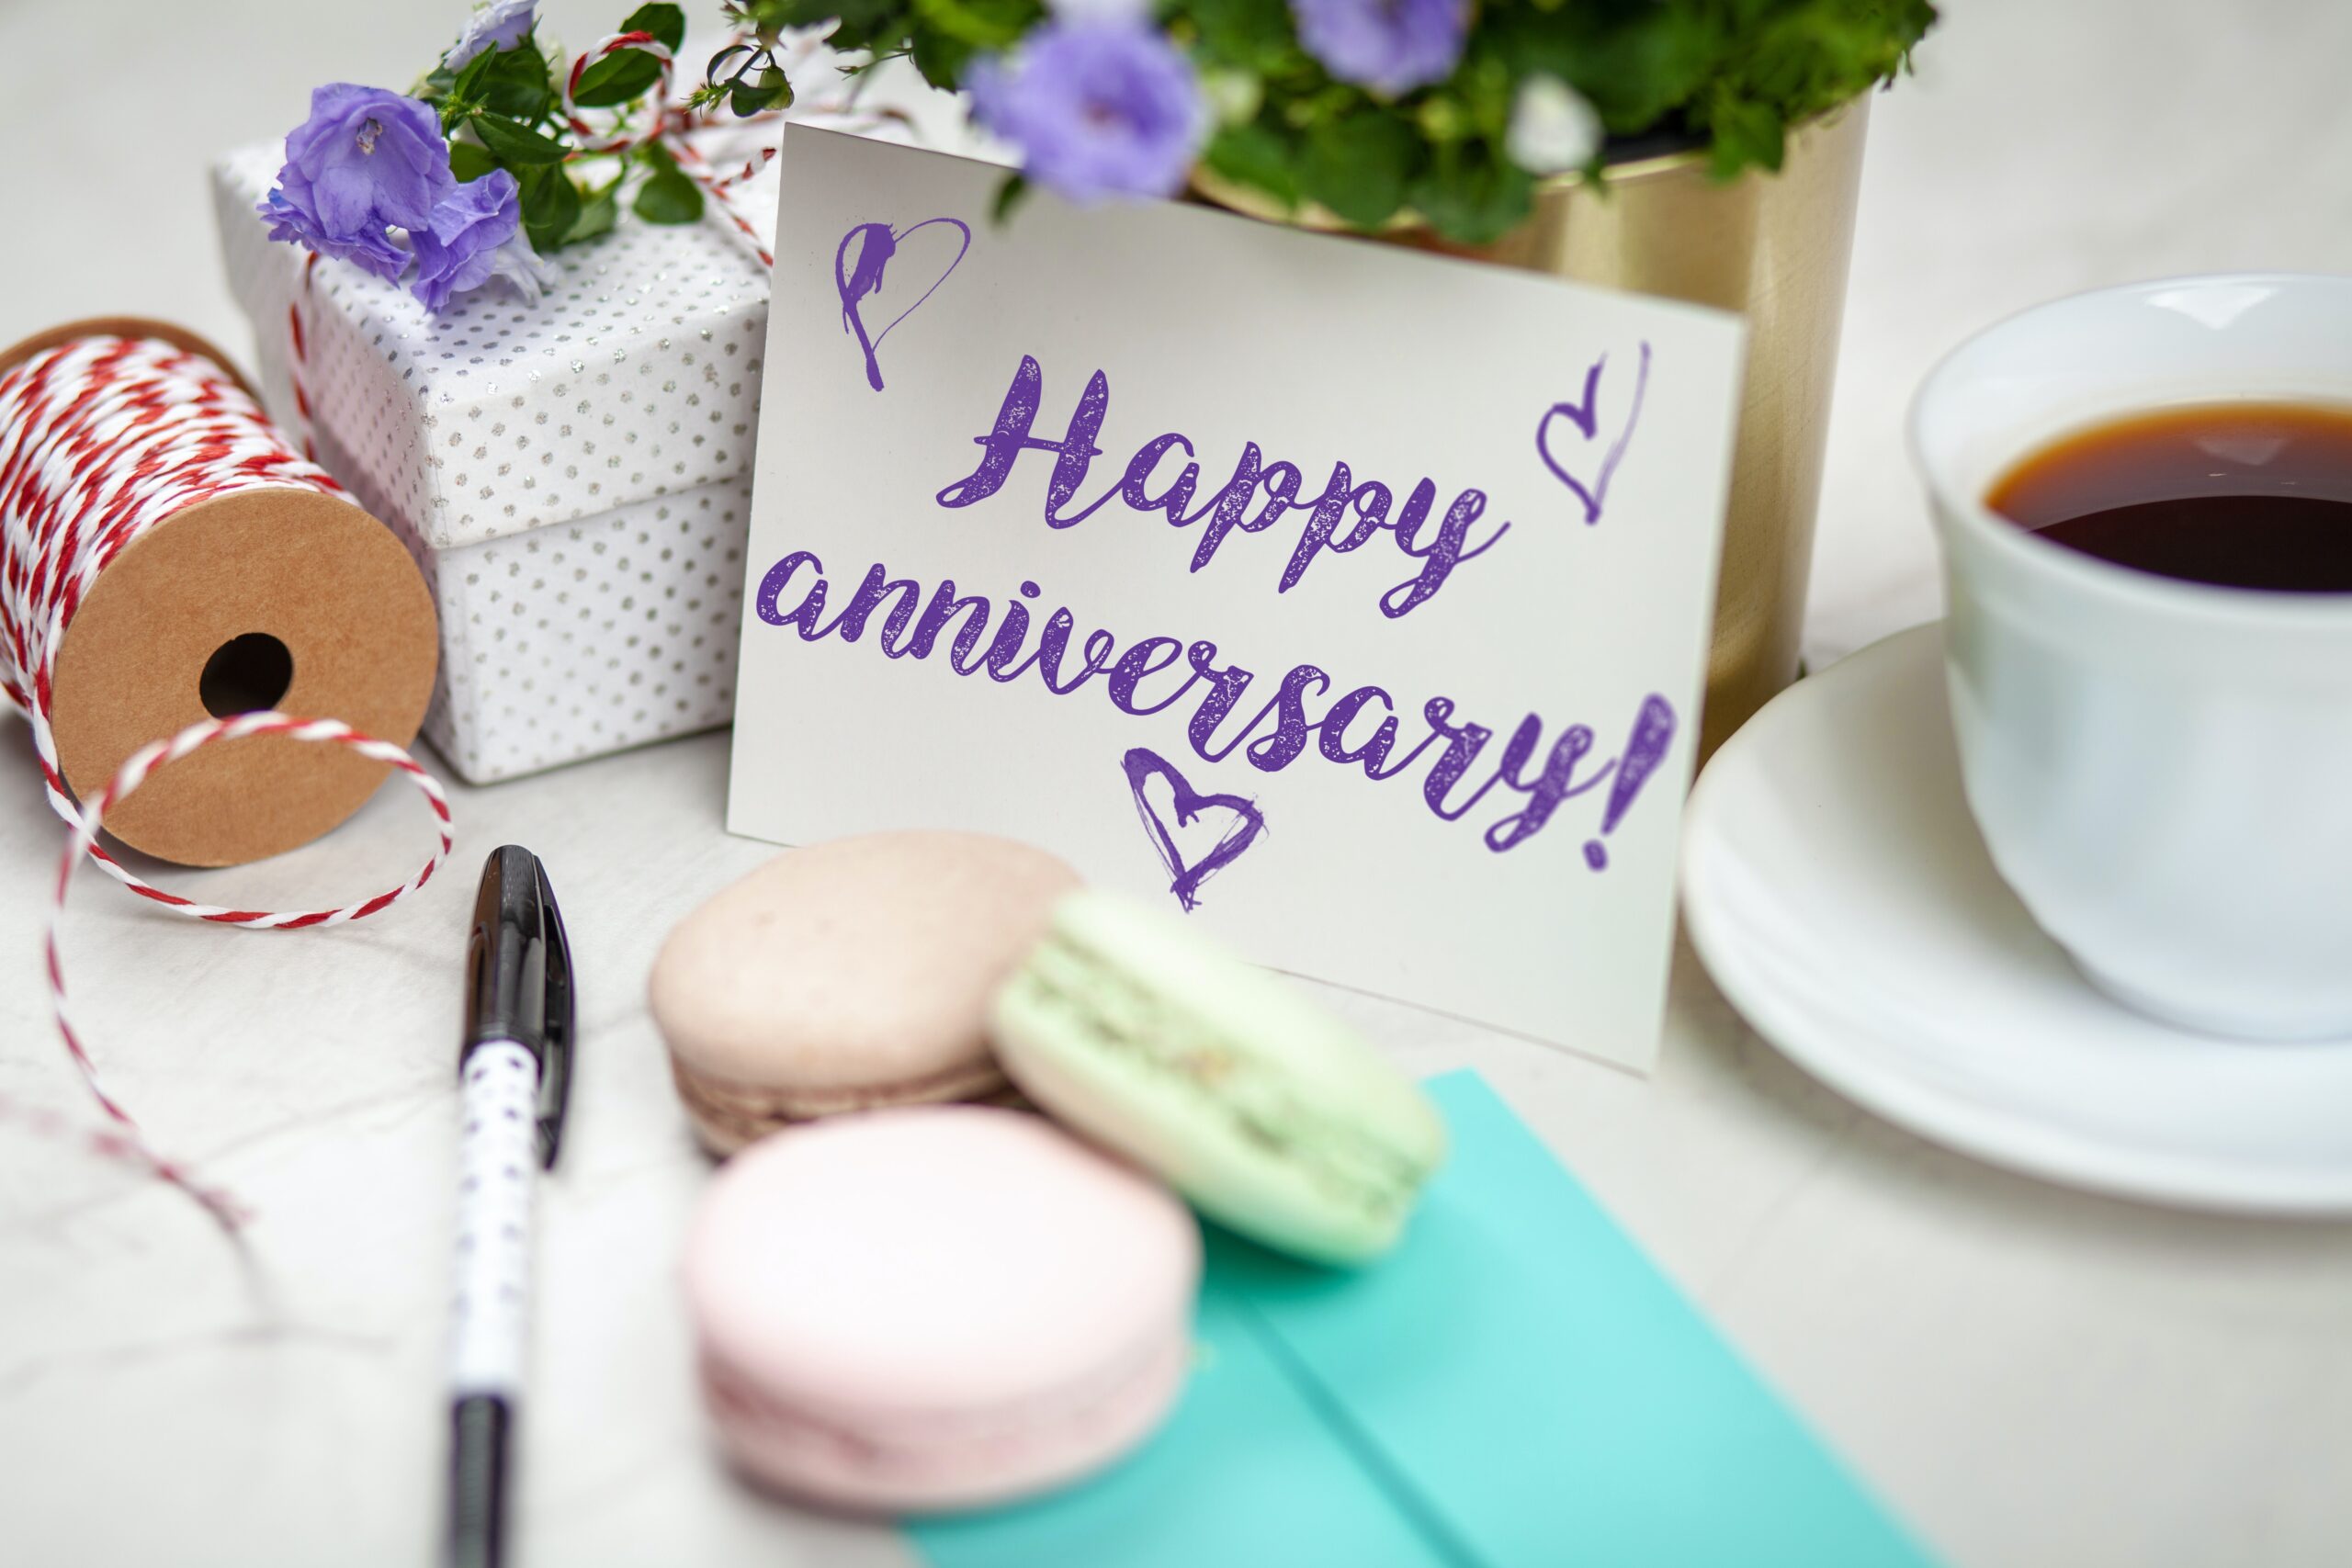 Fantastic Gift Ideas for Your Next Anniversary